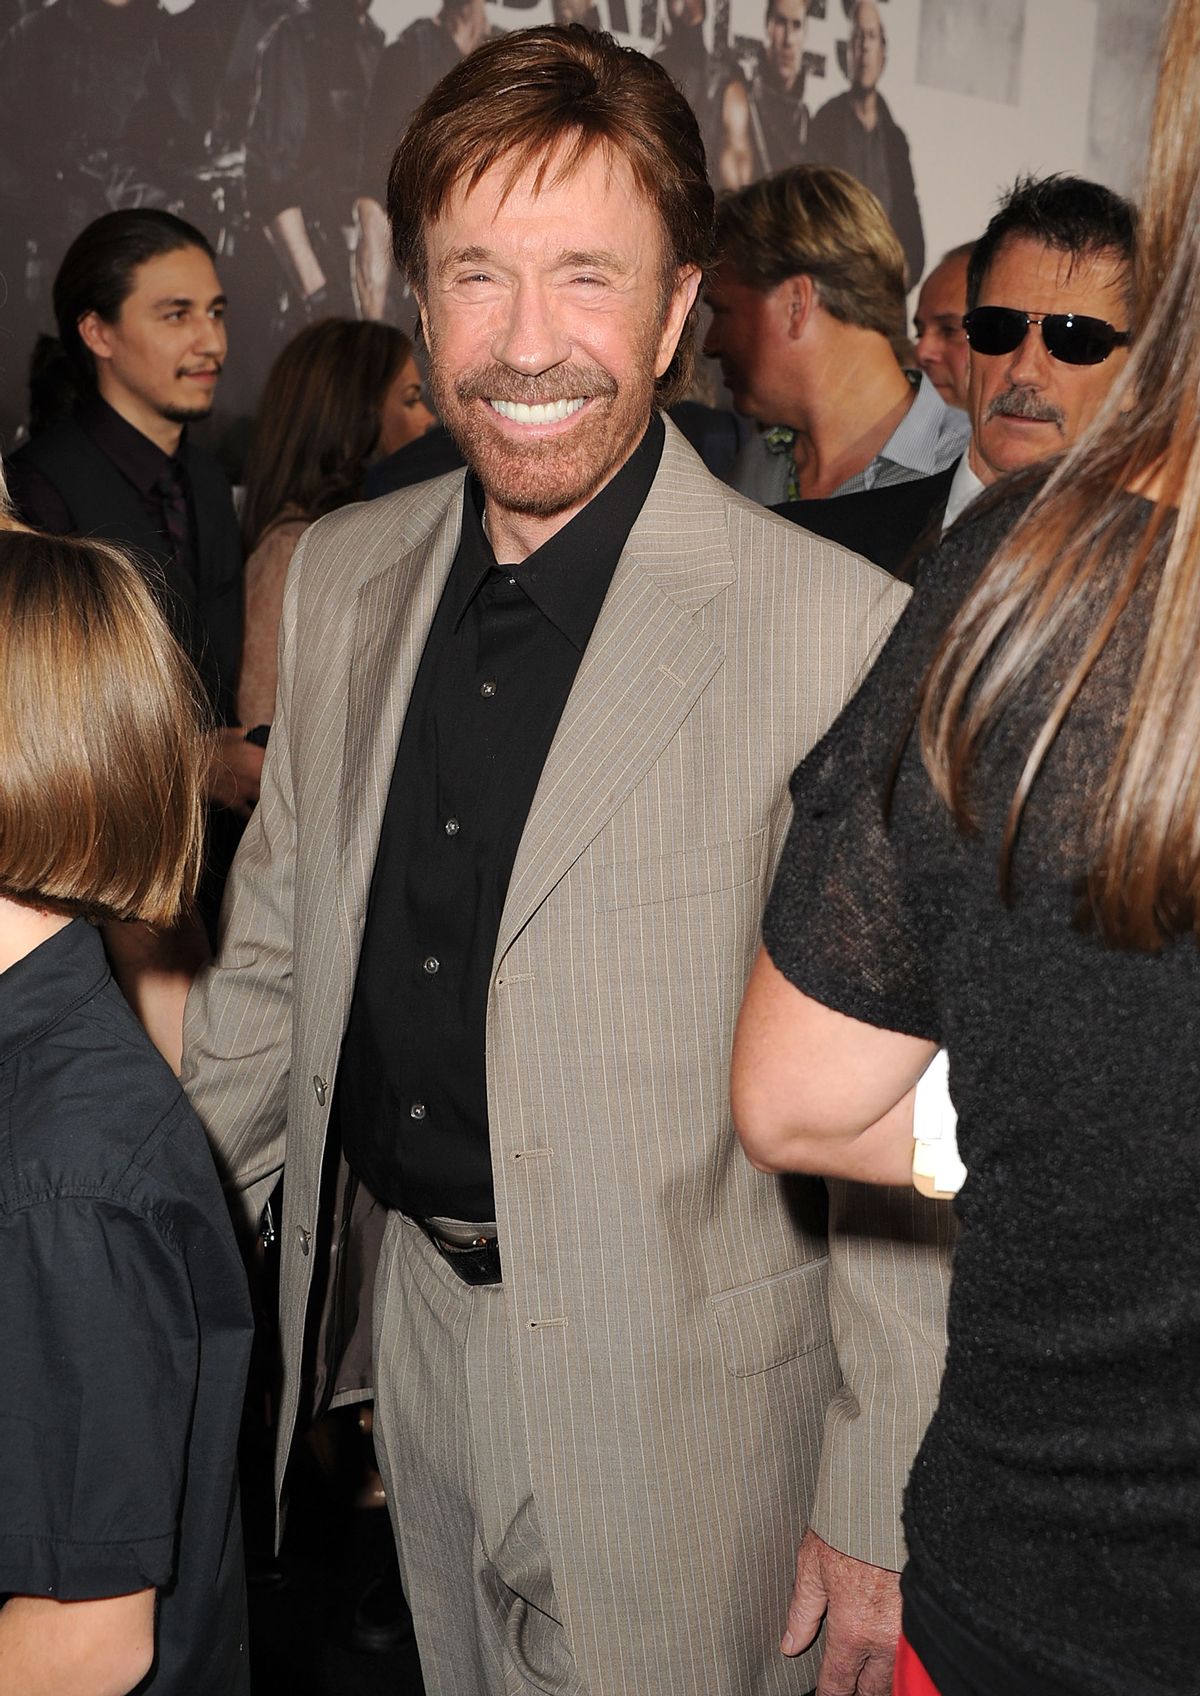 HOLLYWOOD, CA - AUGUST 15:  Chuck Norris arrives at the "The Expendables 2" - Los Angeles Premiere at Grauman's Chinese Theatre on August 15, 2012 in Hollywood, California.  (Photo by Steve Granitz/WireImage) (Steve Granitz/WireImage)